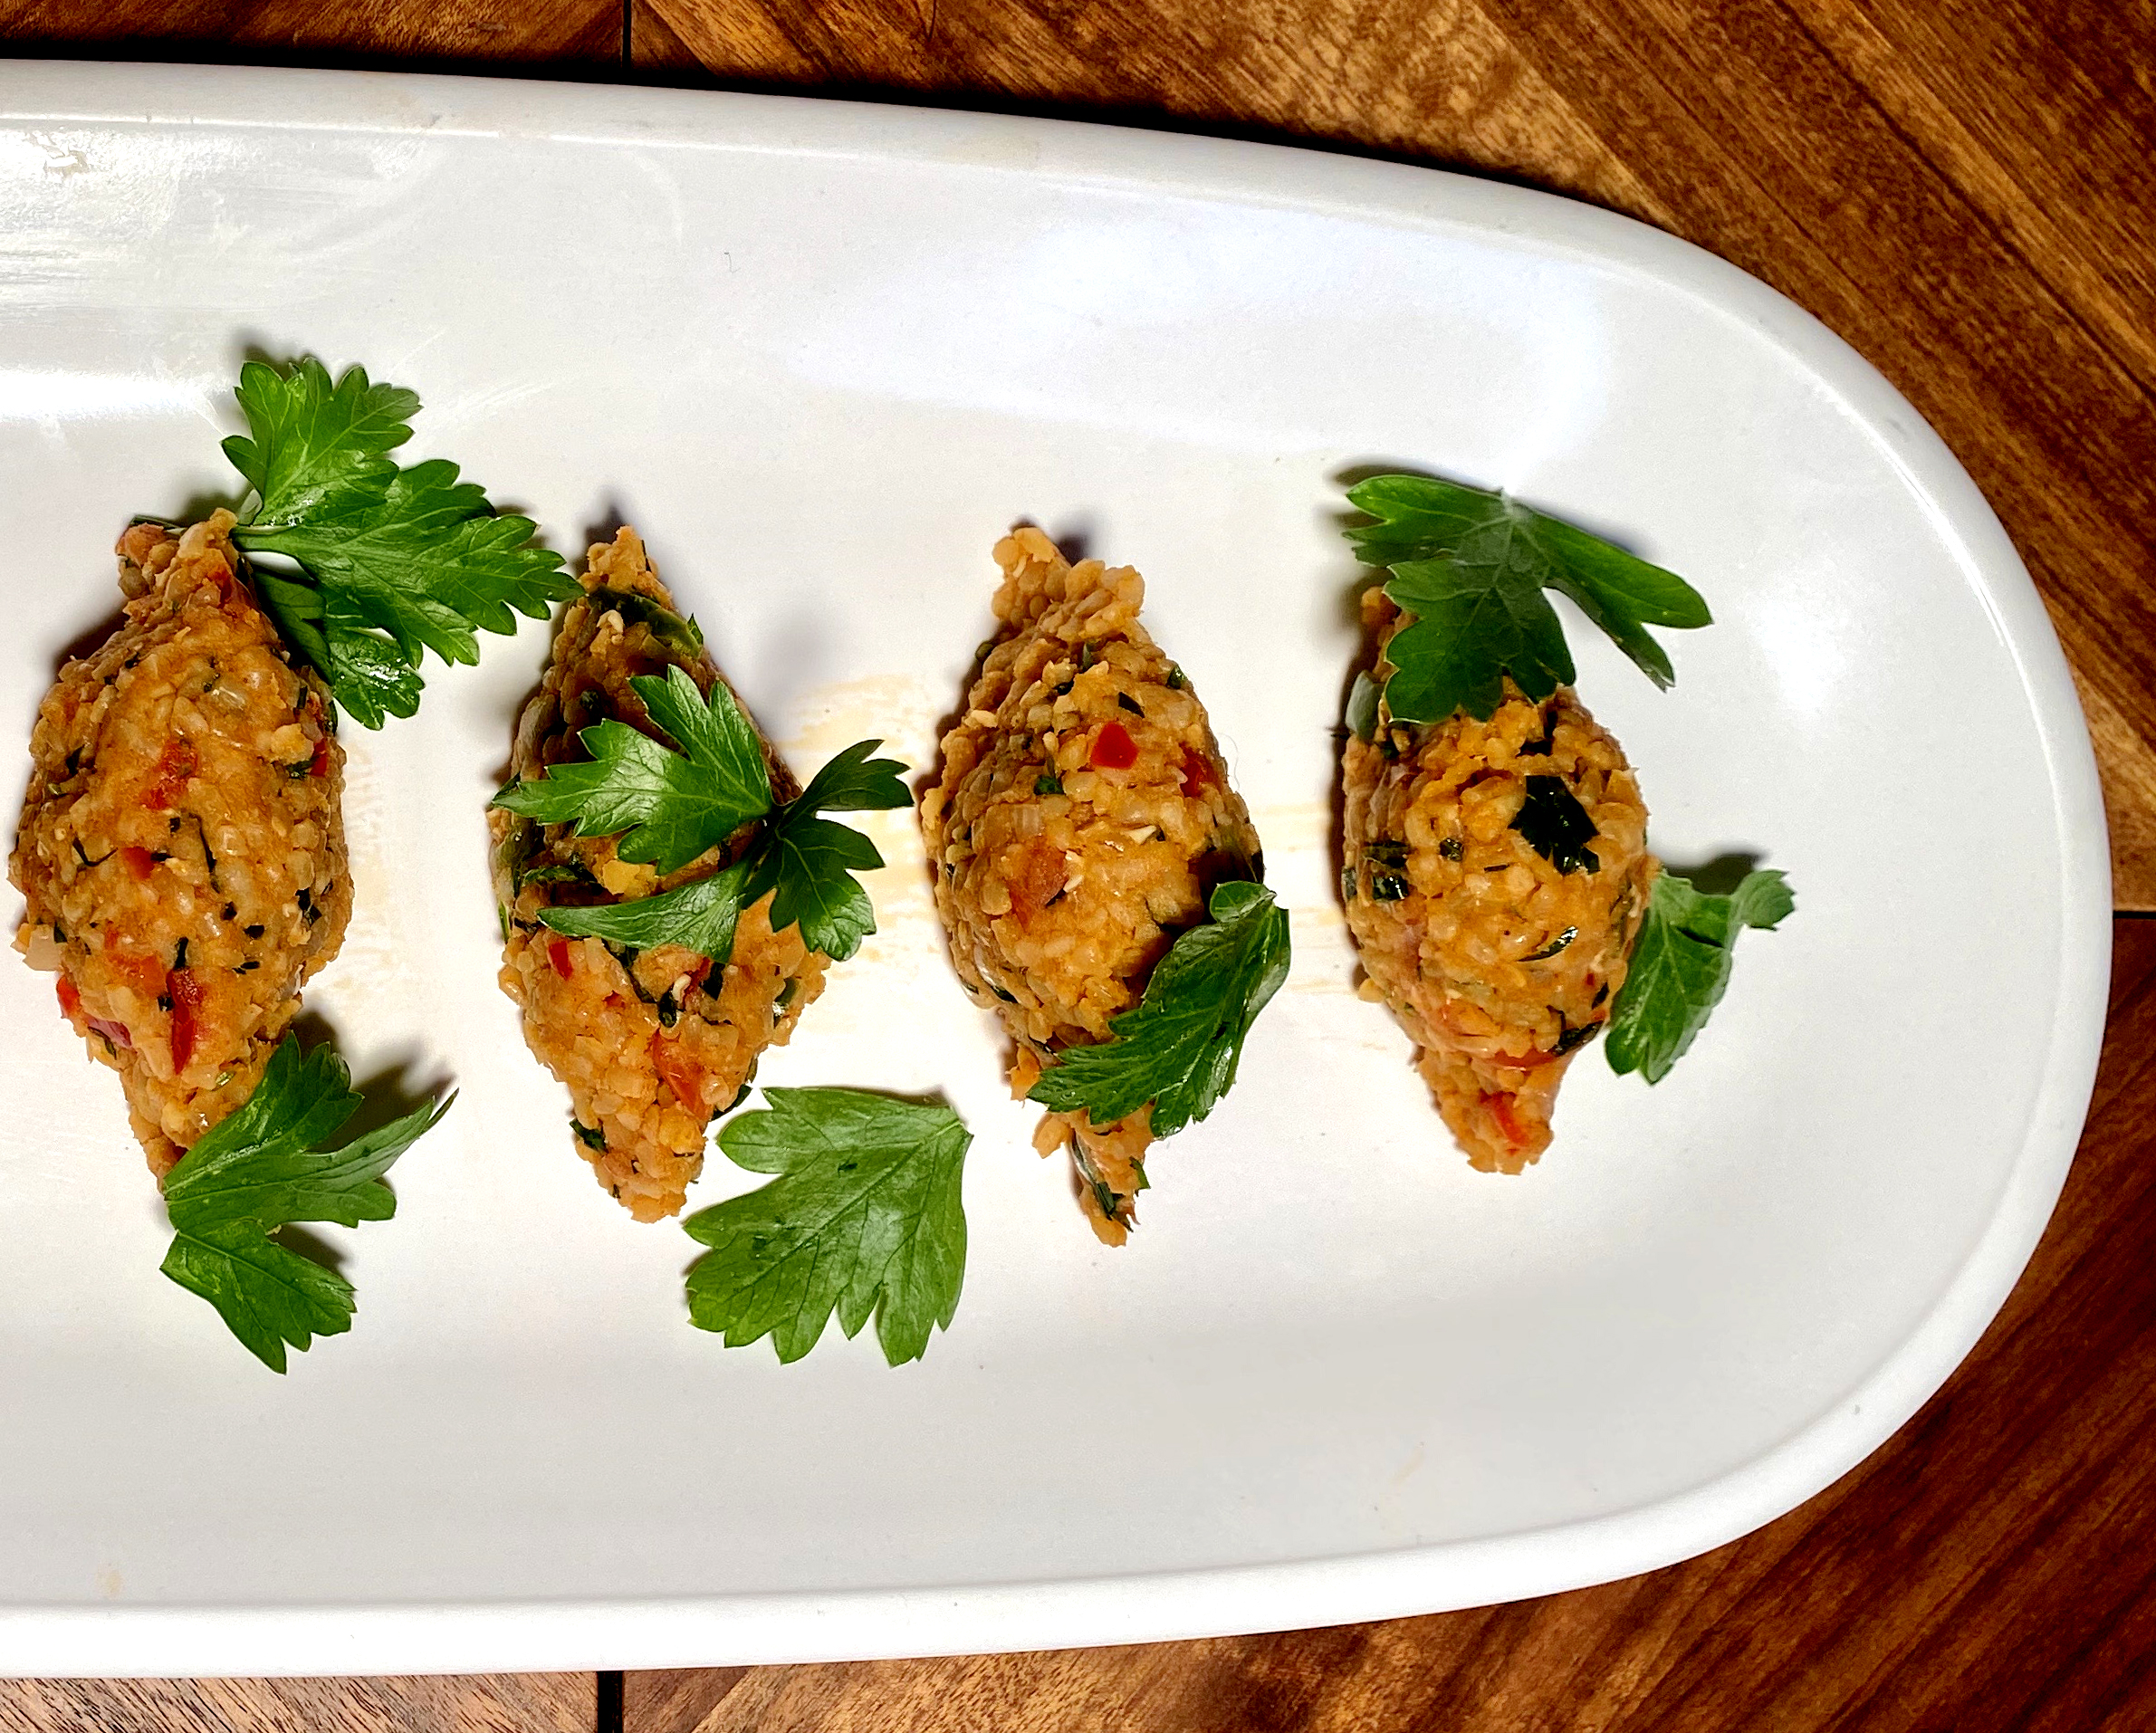 KIBBEH NEYEH: Syrian Bulgur Salad Torpedoes with Red Lentils, Scallions, Peppers and Cumin